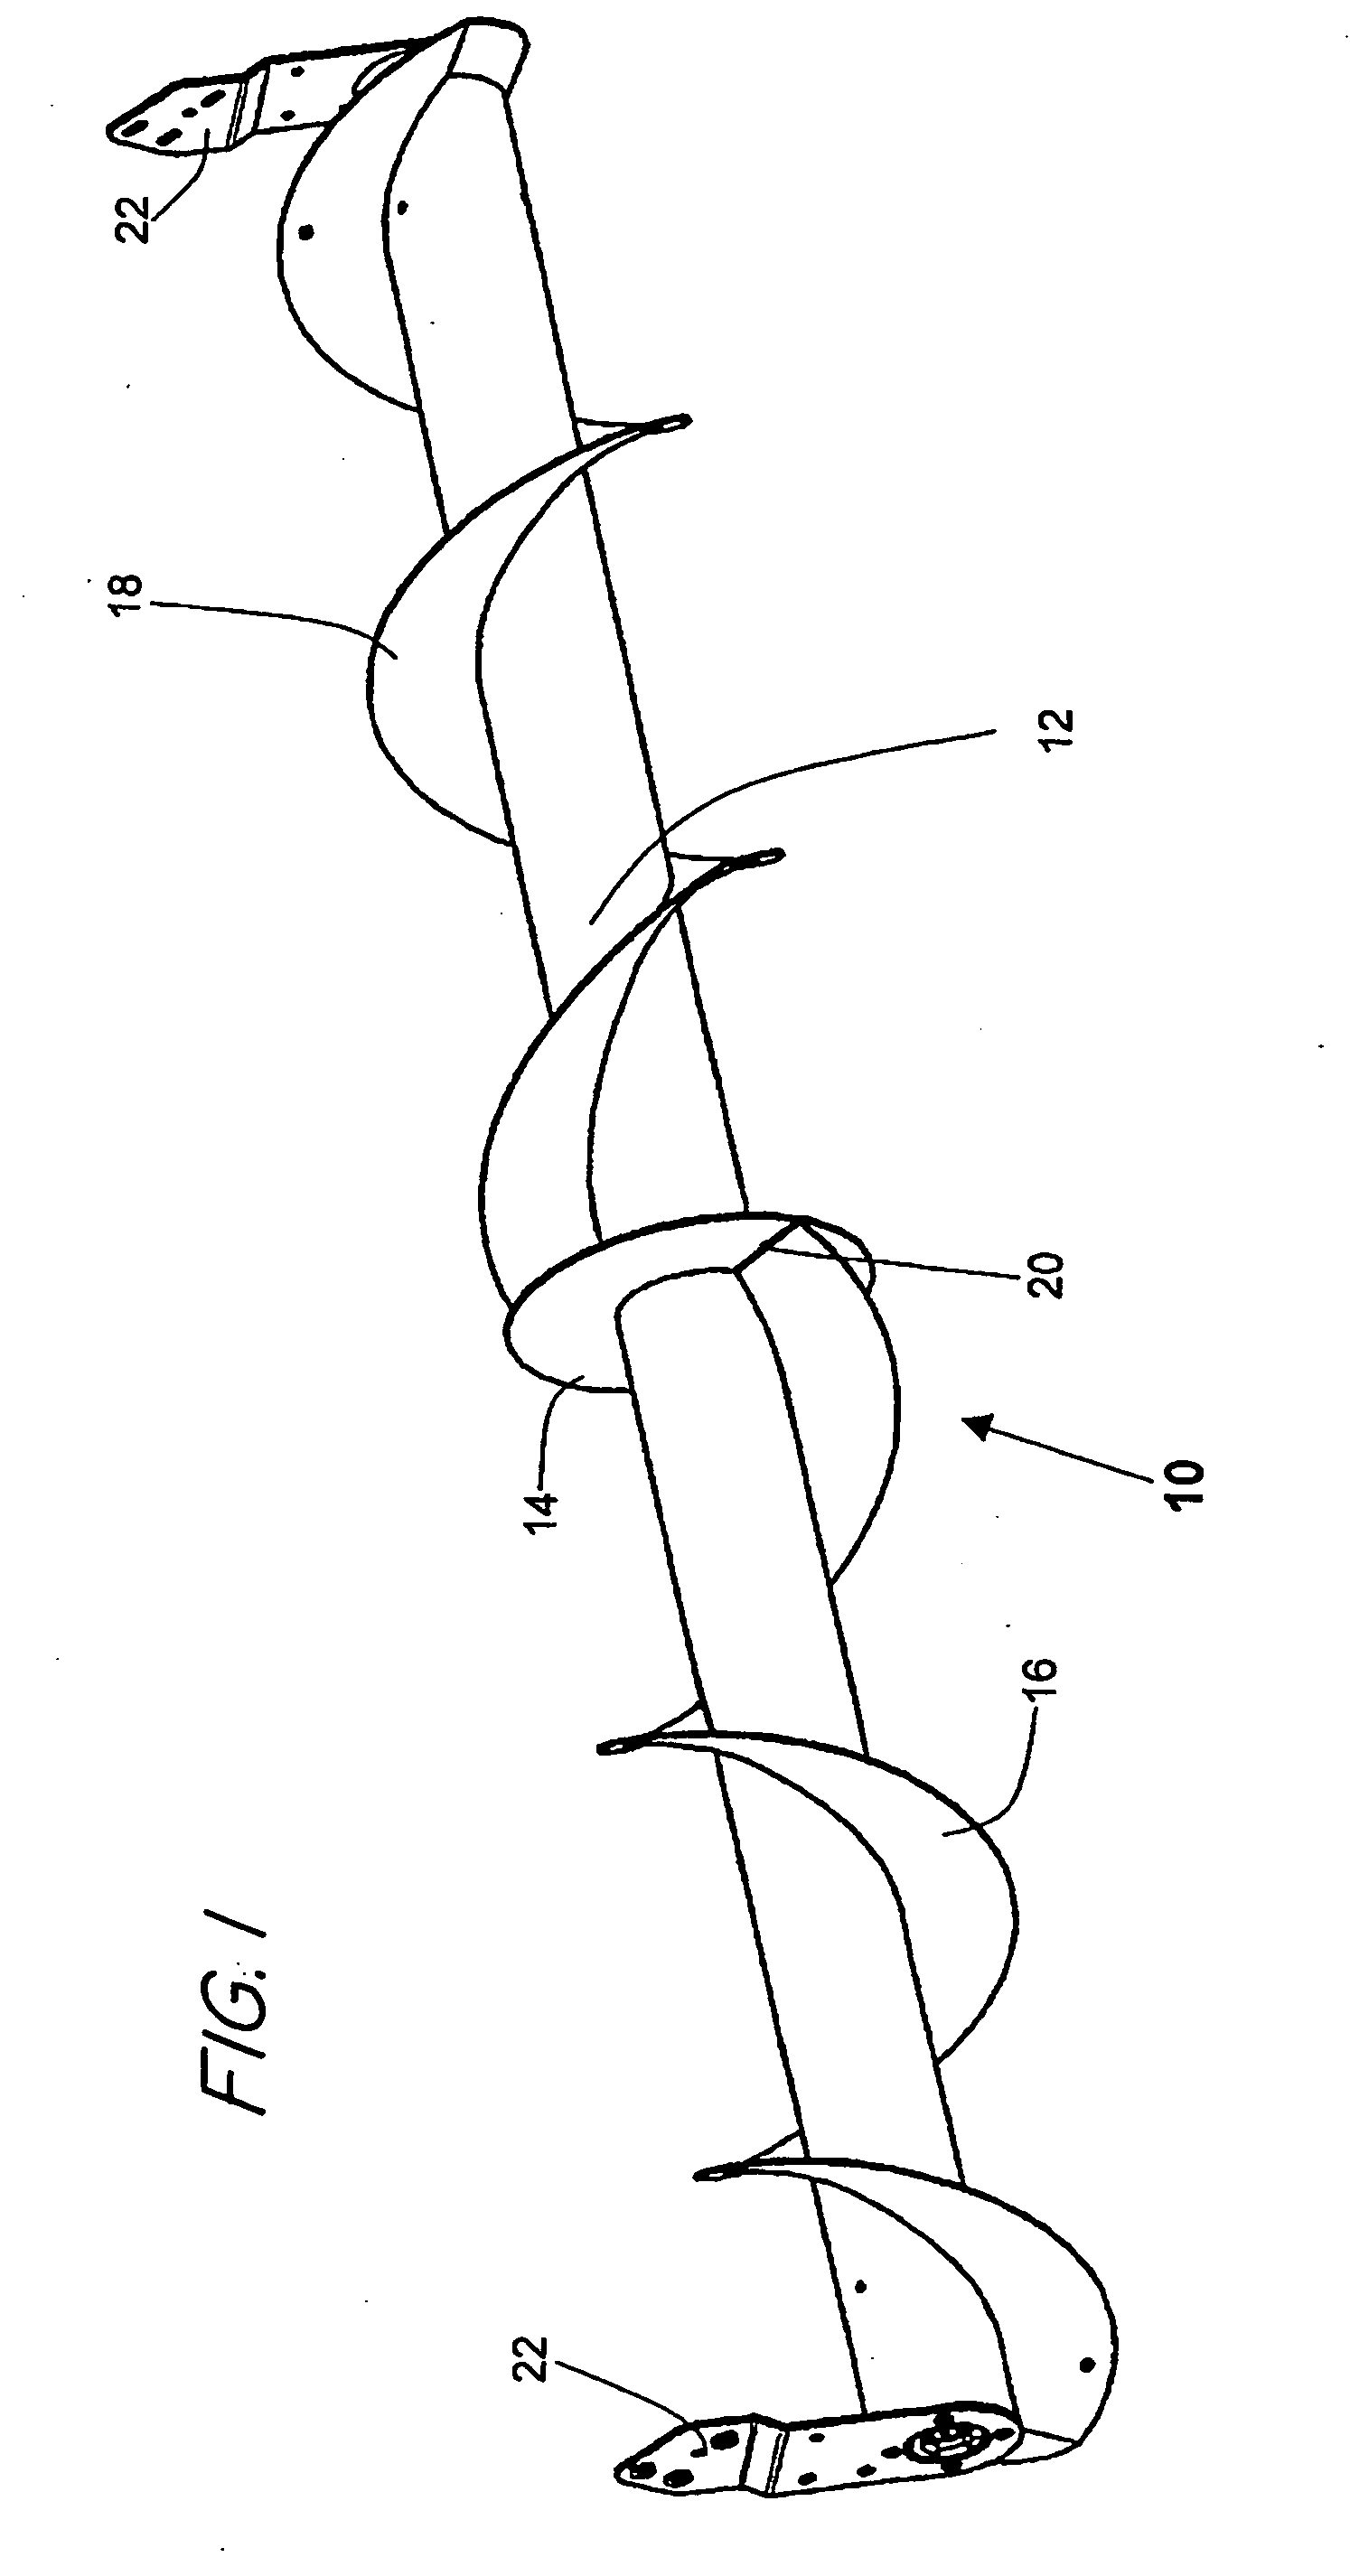 Transverse conveying auger for a harvesting head